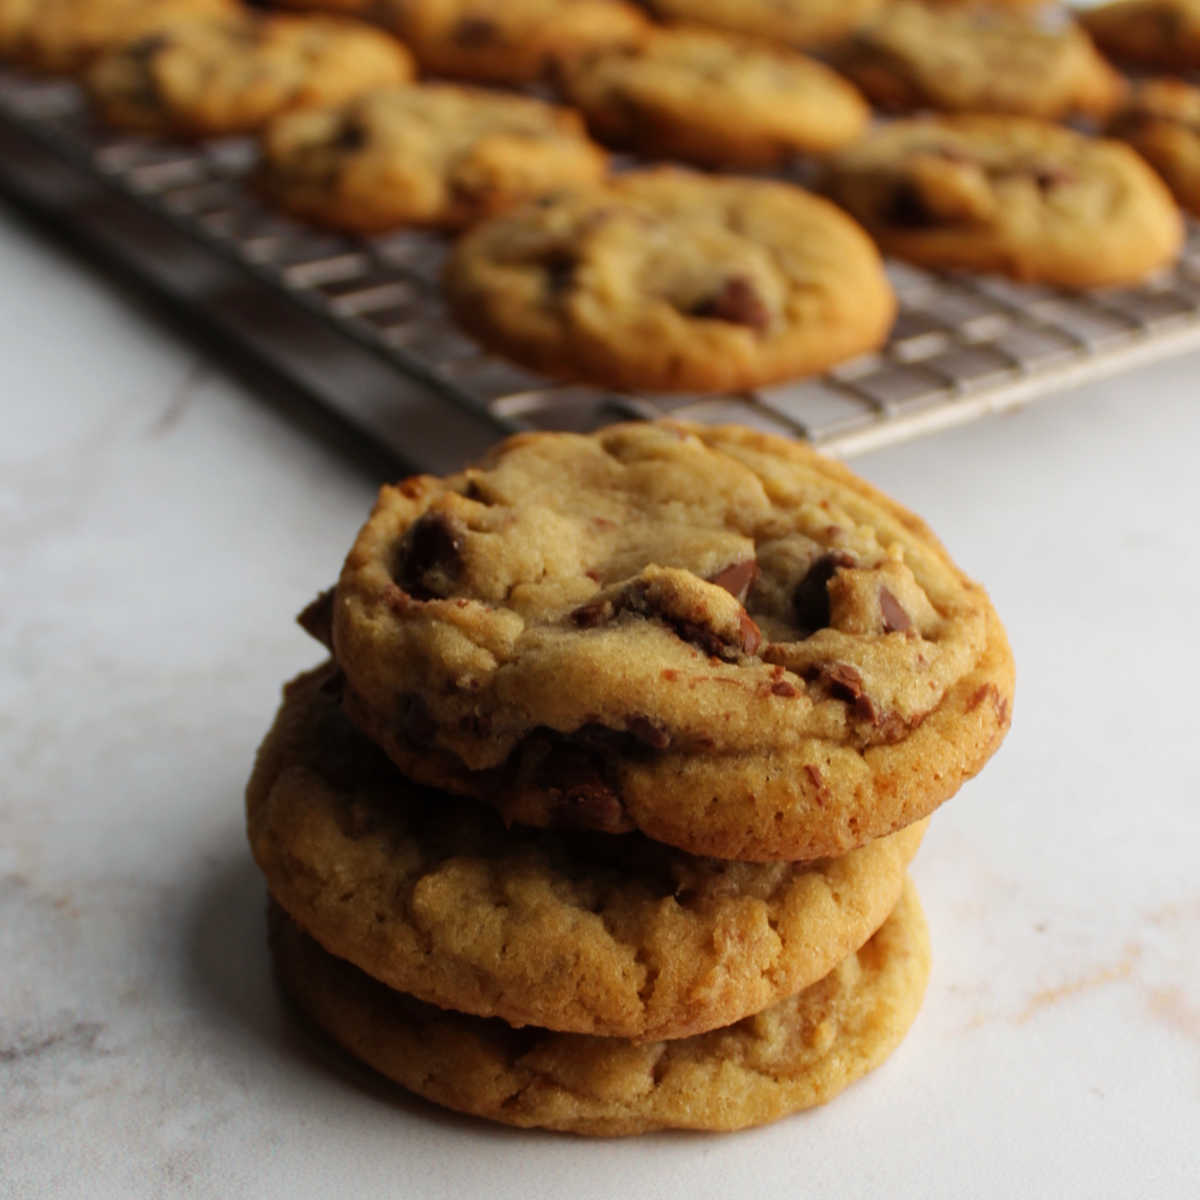 Stack of chocolate chip cookies in front of cooling rack of cookies.